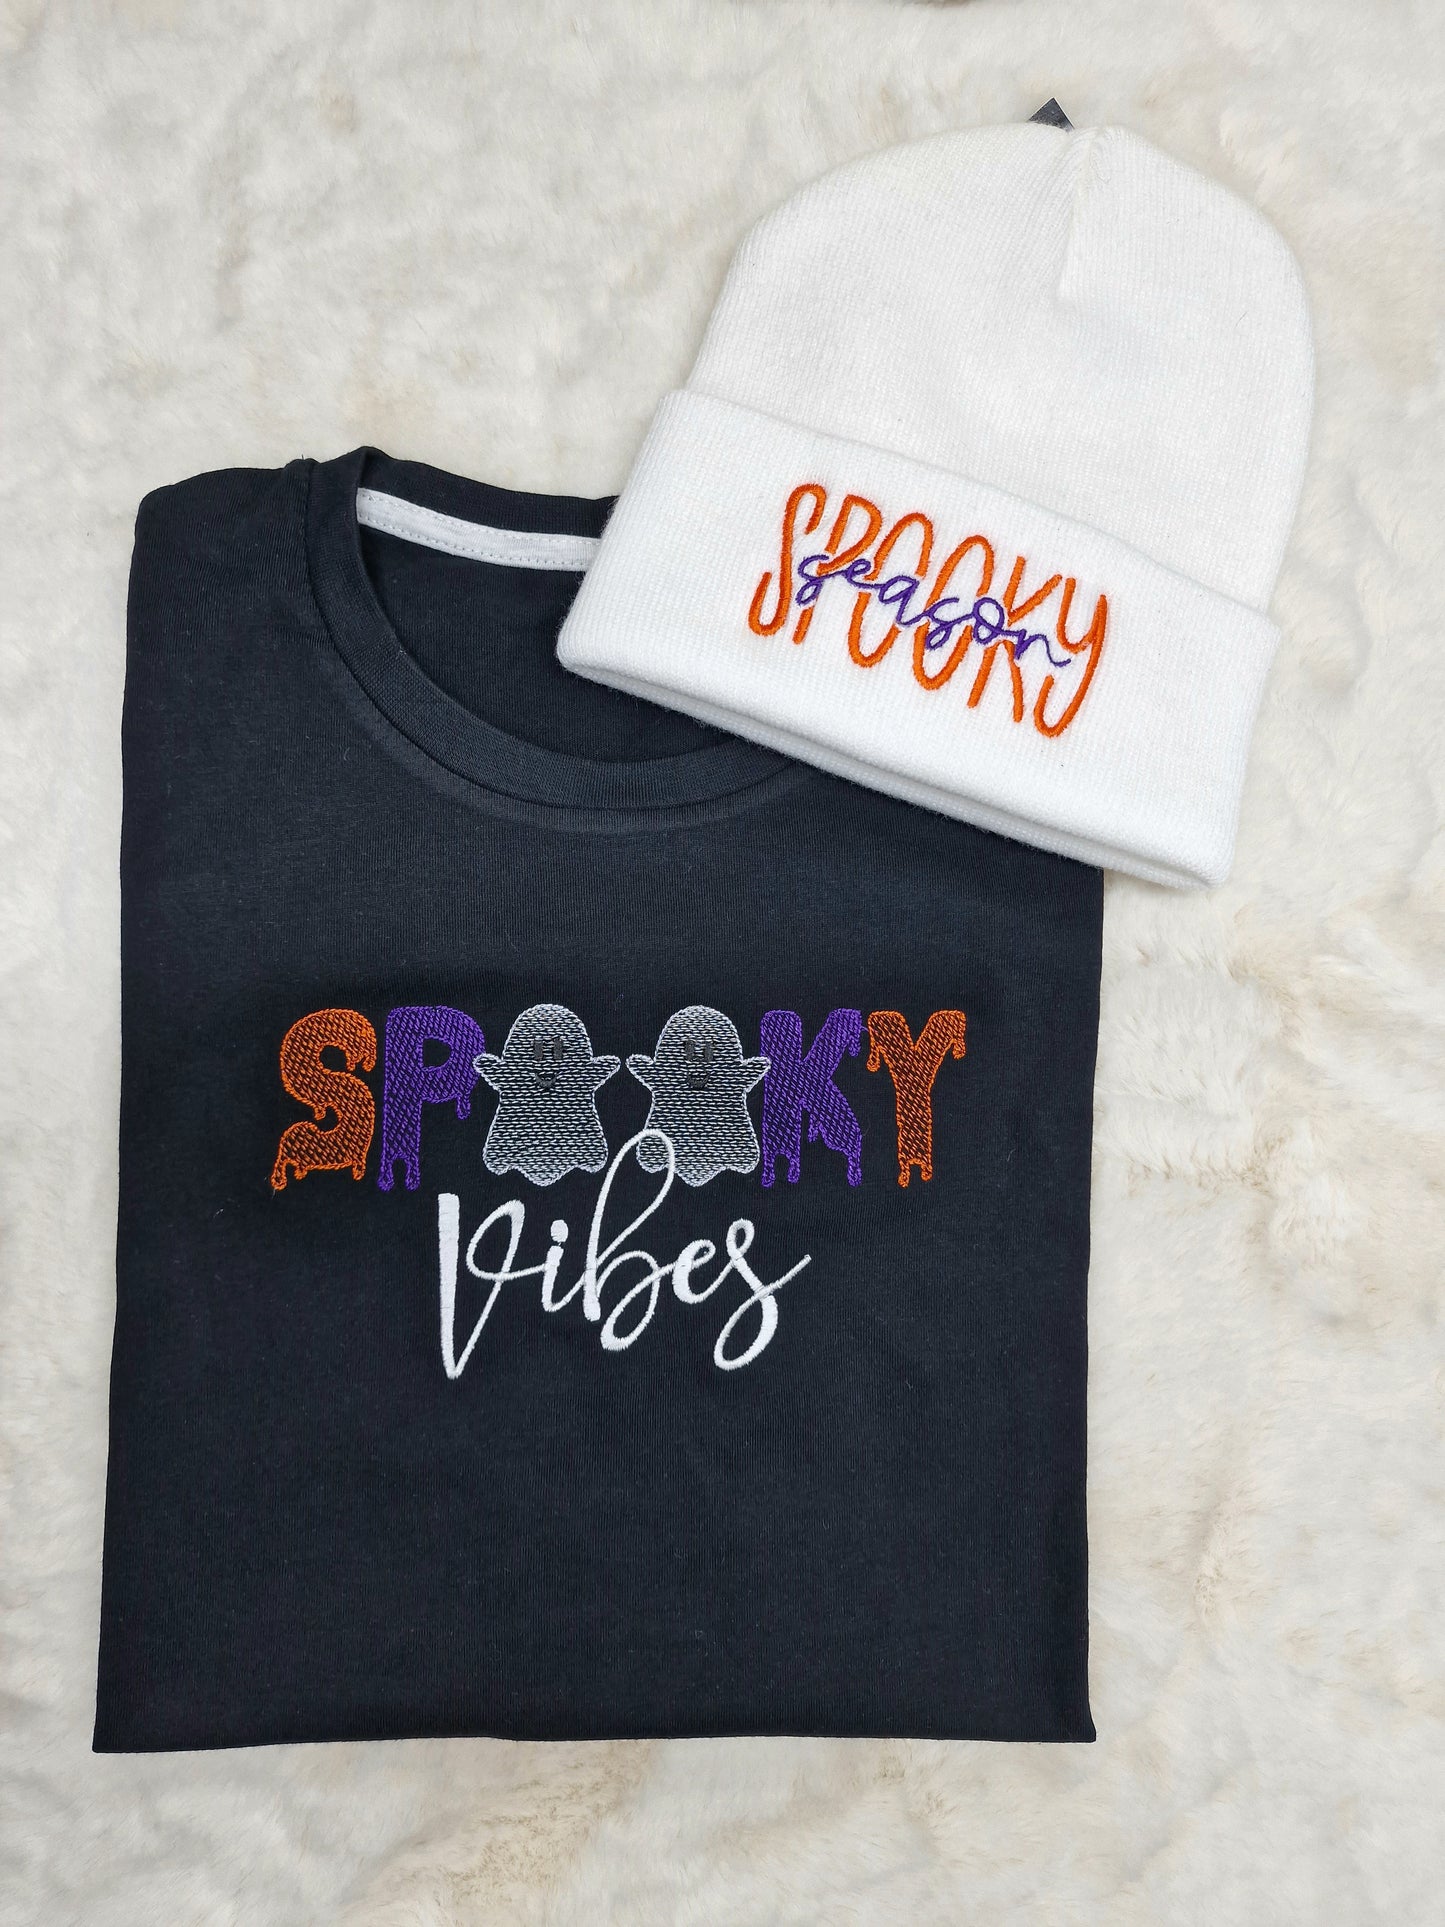 Spooky Vibes T-shirt